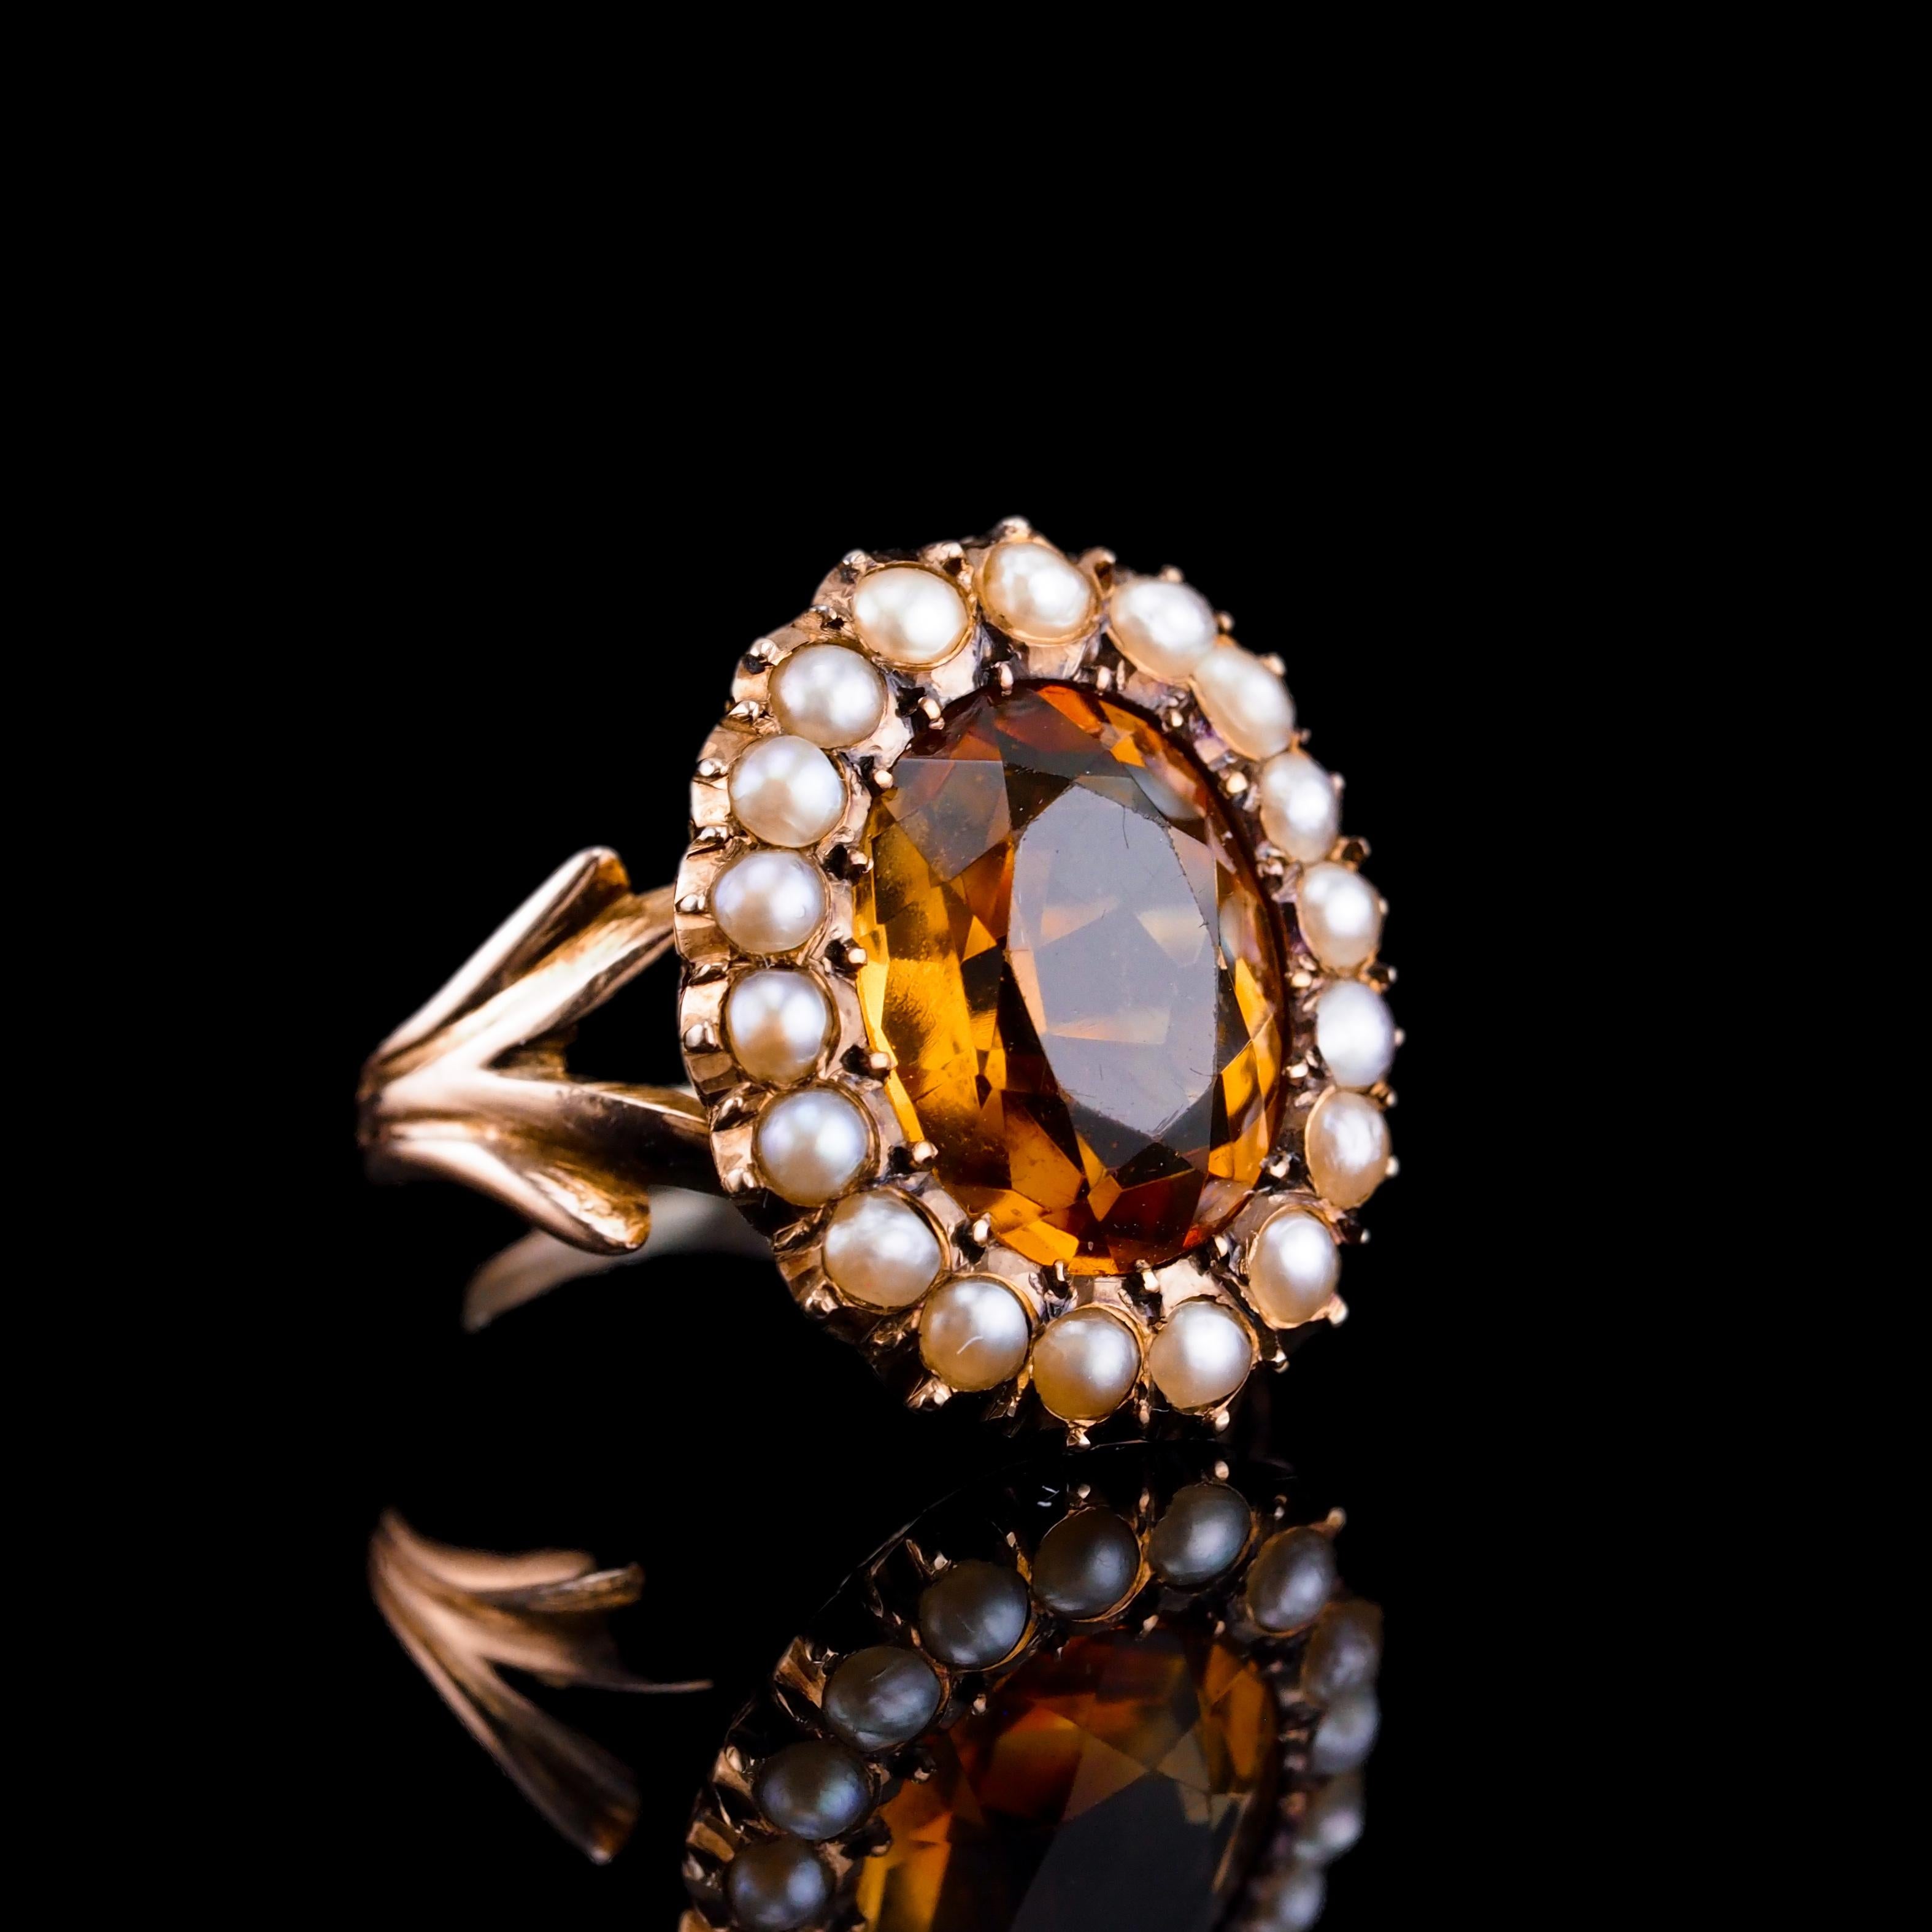 We are delighted to offer this fabulous antique Victorian citrine and seed pearl ring made c.1890.Immediately upon first glance, the citrine's transparent yet rich honey-like colour captivates the eye.
  
Surrounding the central faceted citrine, a